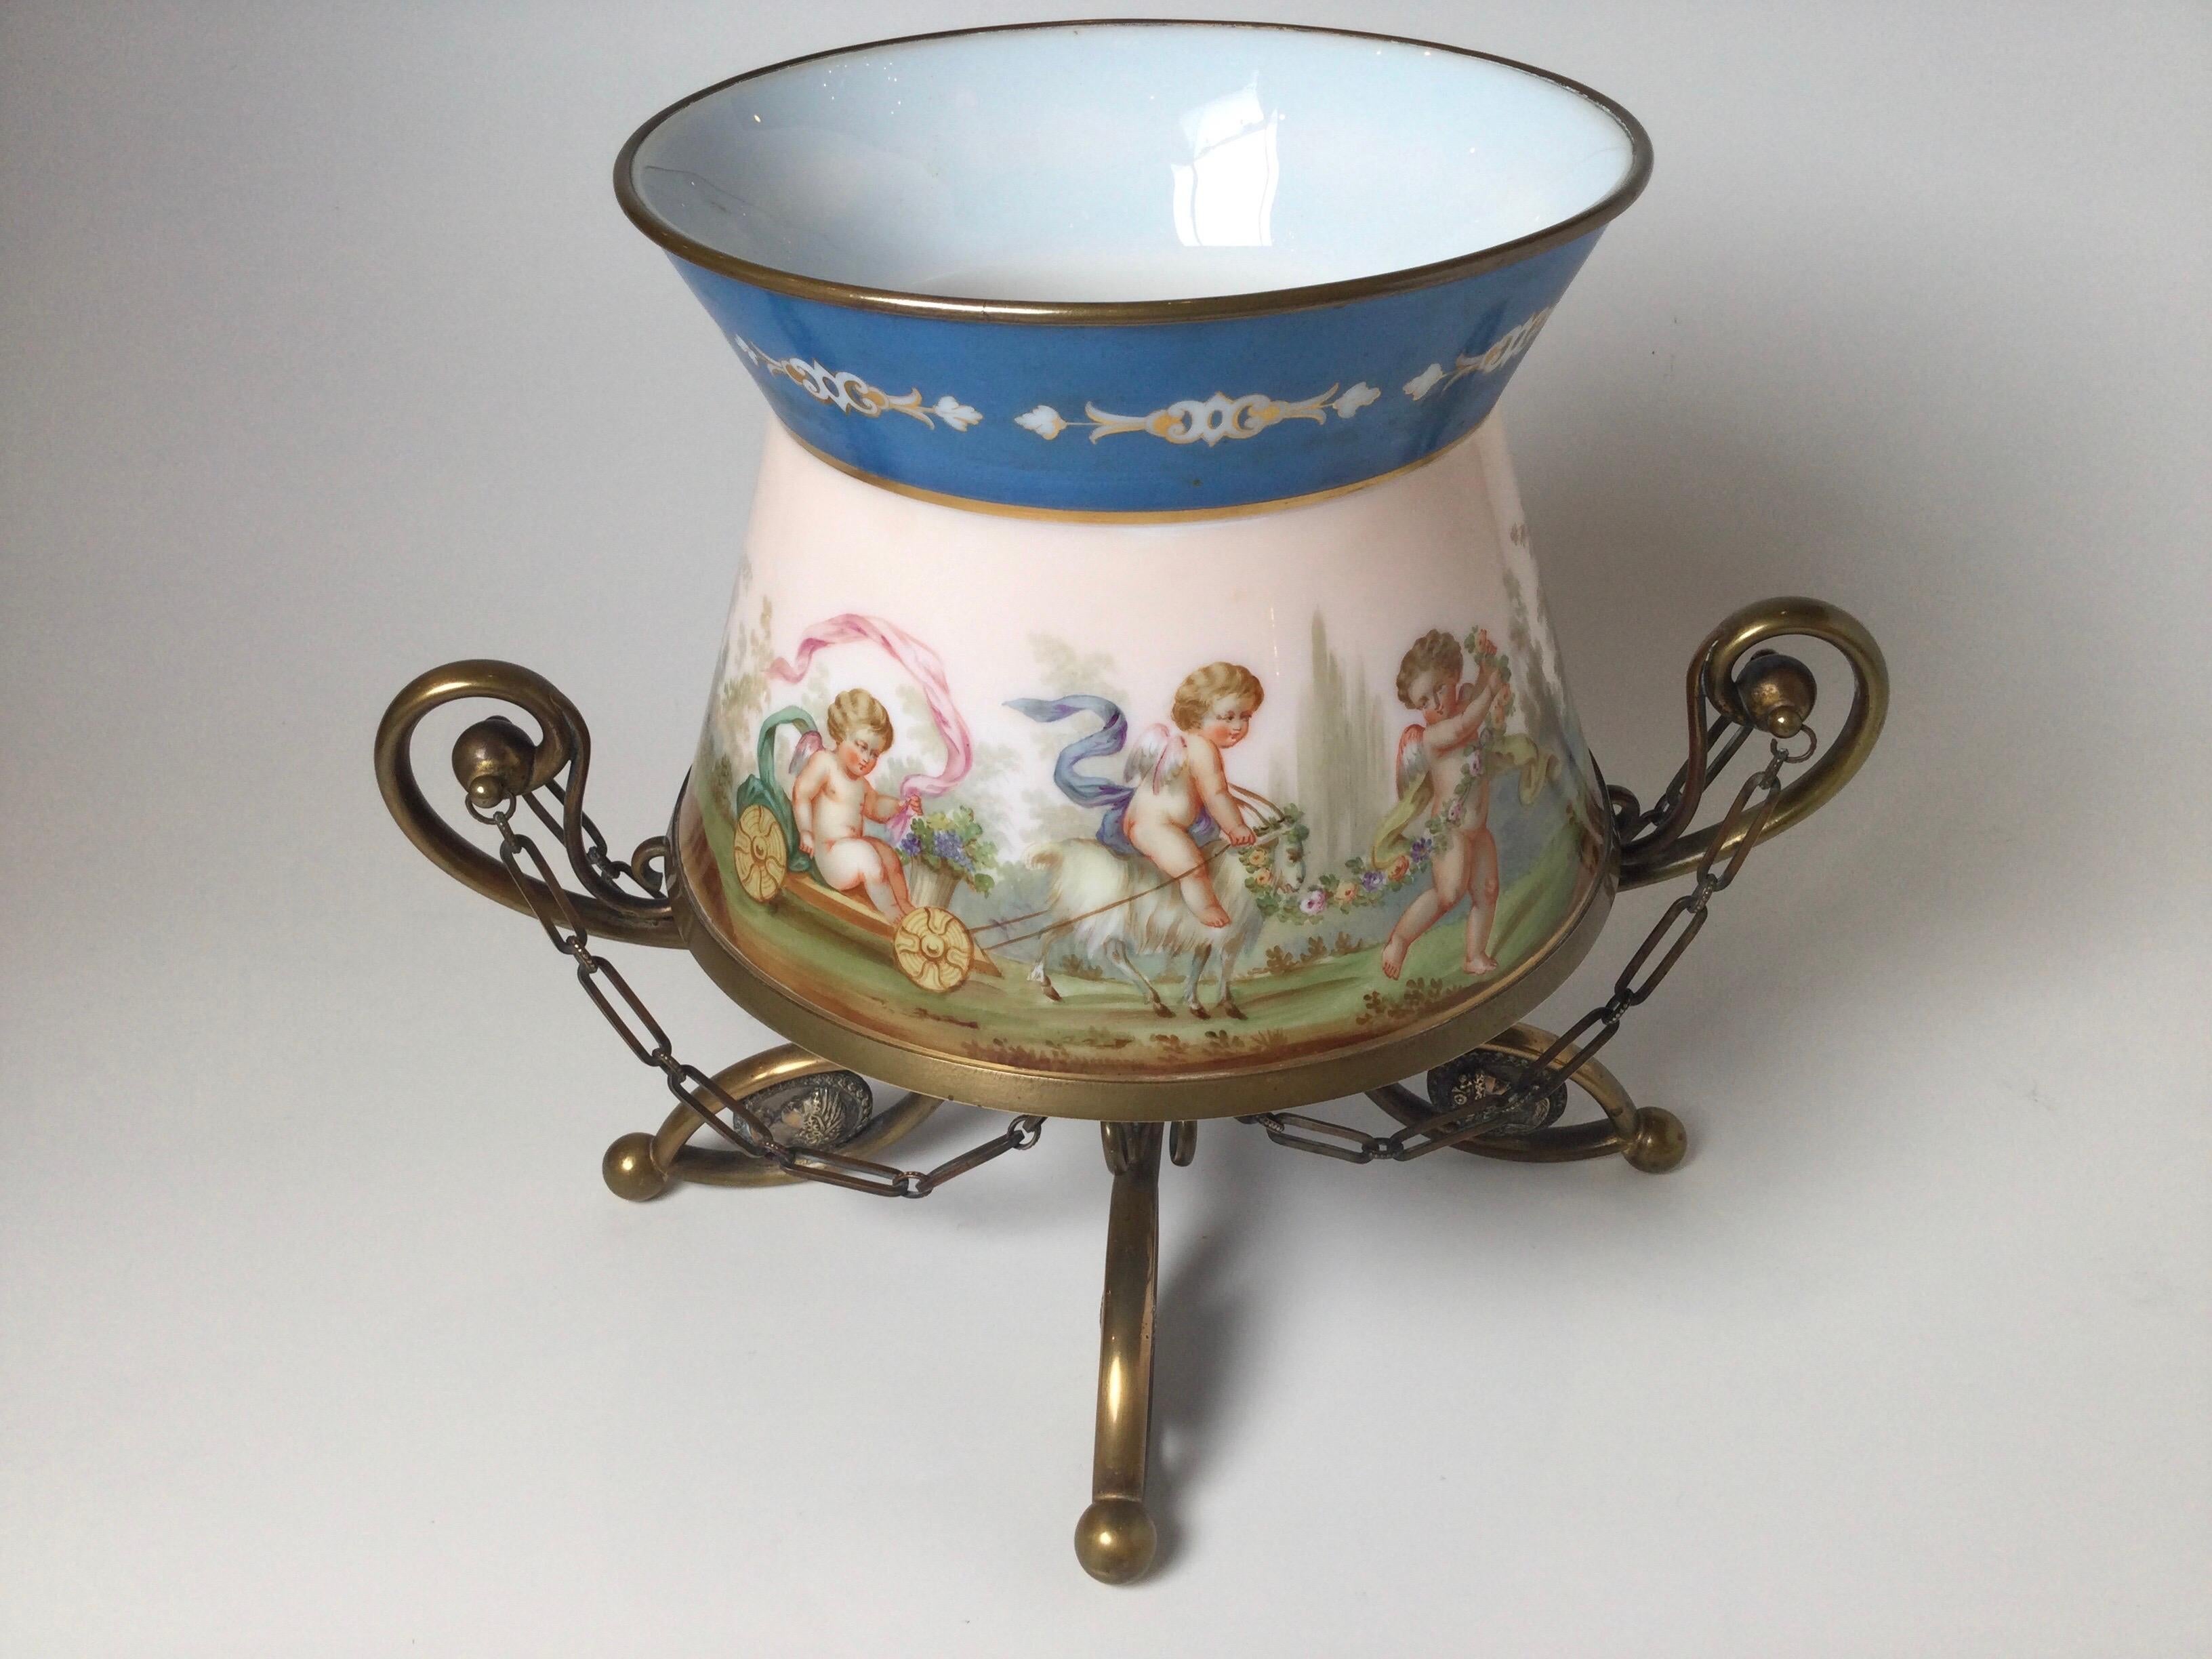 A French opaline glass hand painted center bowl depicting cupids, goats frolicing in a pastoral scene. The attached footed mount with chains in original aged bronze. The hand painted glass with Celest blue border.